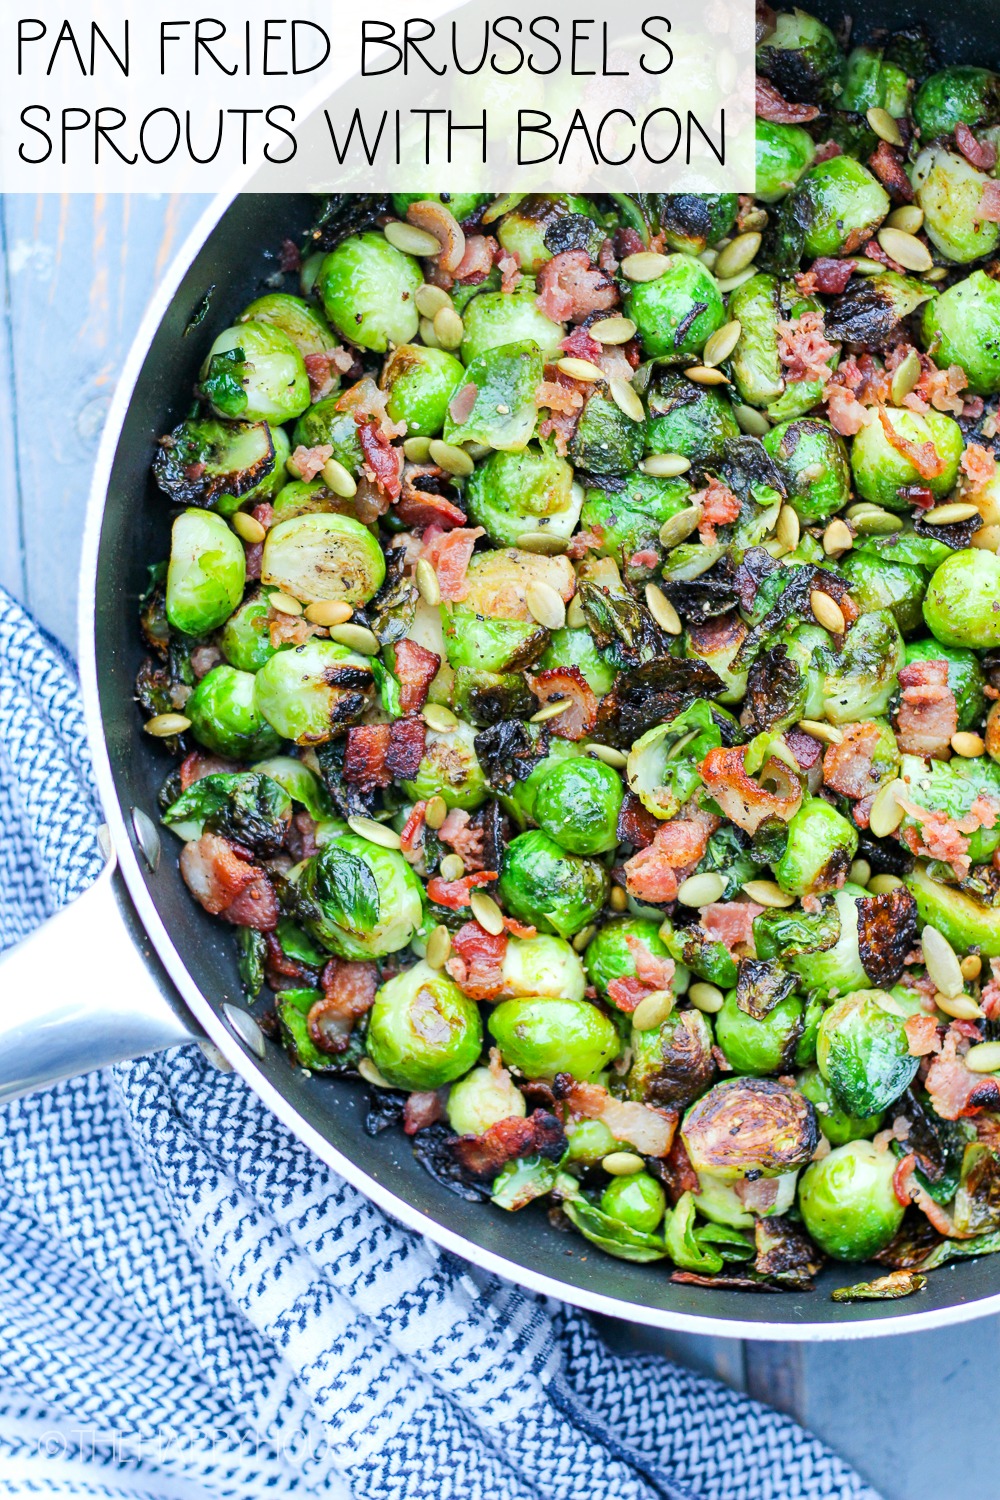 Pan Fried Brussel Sprouts With Bacon poster.